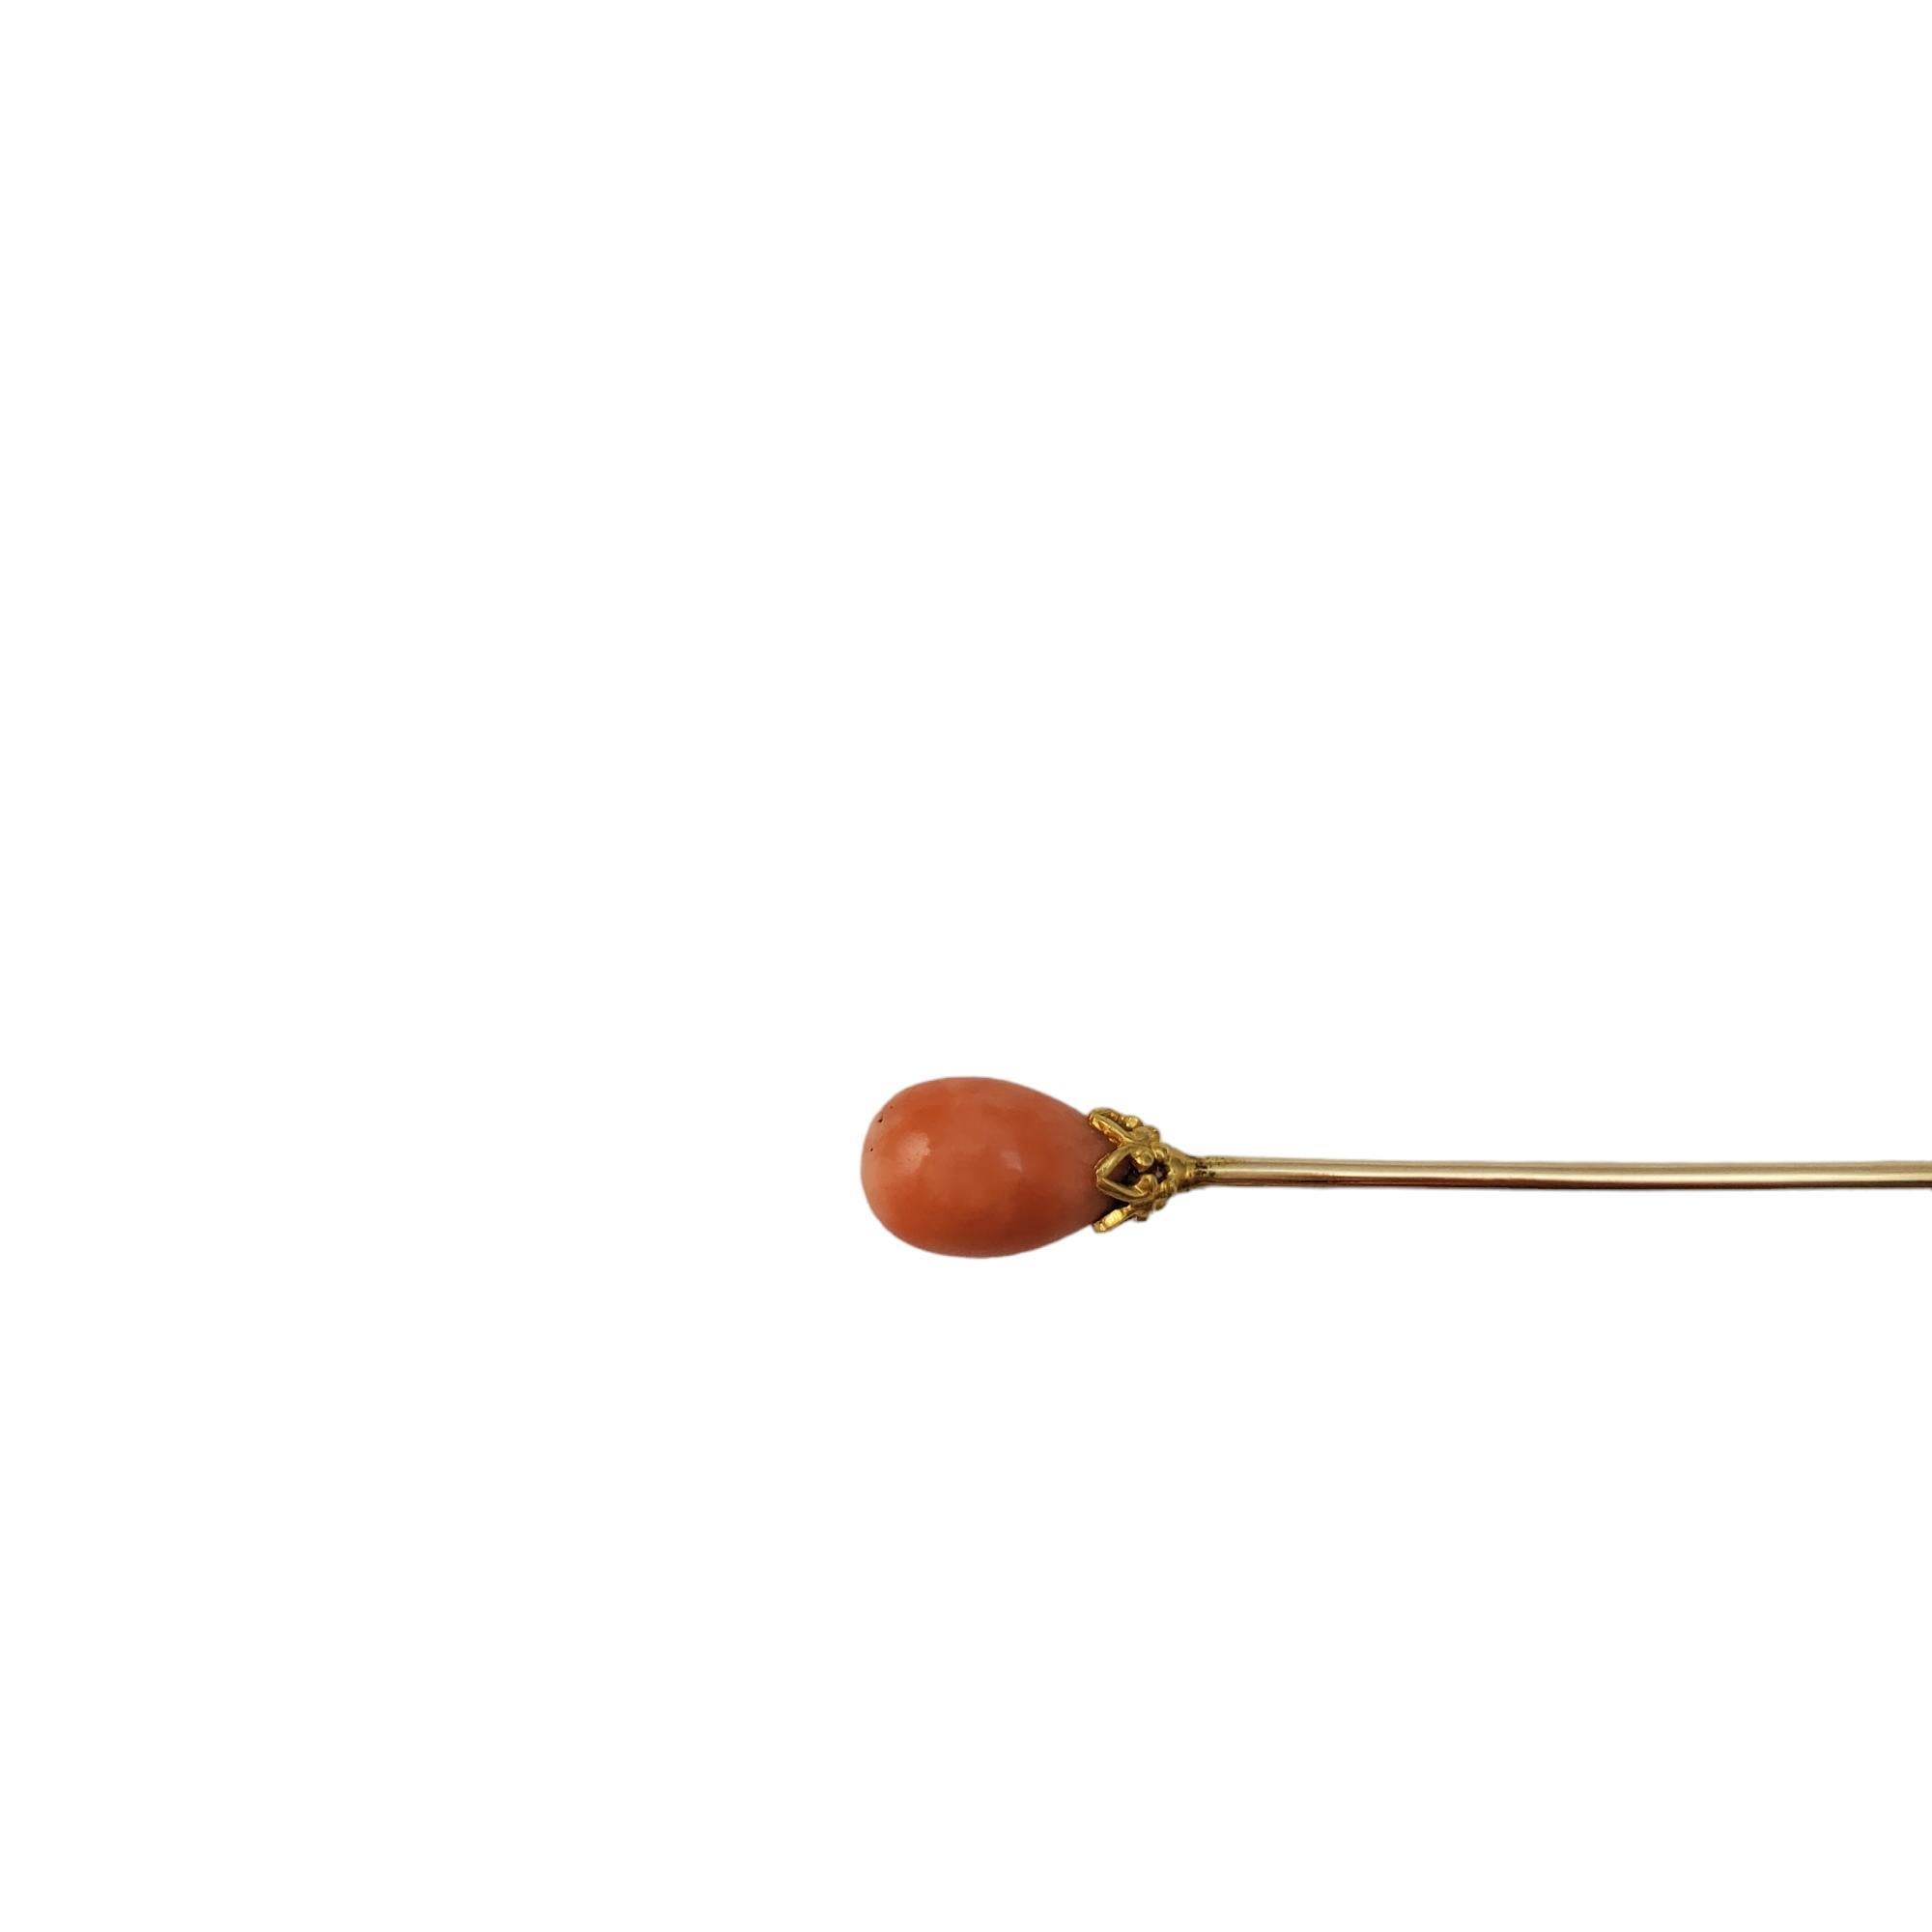 Vintage 14K Yellow Gold Coral Stickpin - 

This 14K yellow gold coral stickpin is a gorgeous addition to your outfits! 

Stick pin weight (clutch is not gold) - 0.8 dwt / 1.24 g

Size: 63.7mm Long

Hallmark: 14K 

Very good condition, professionally